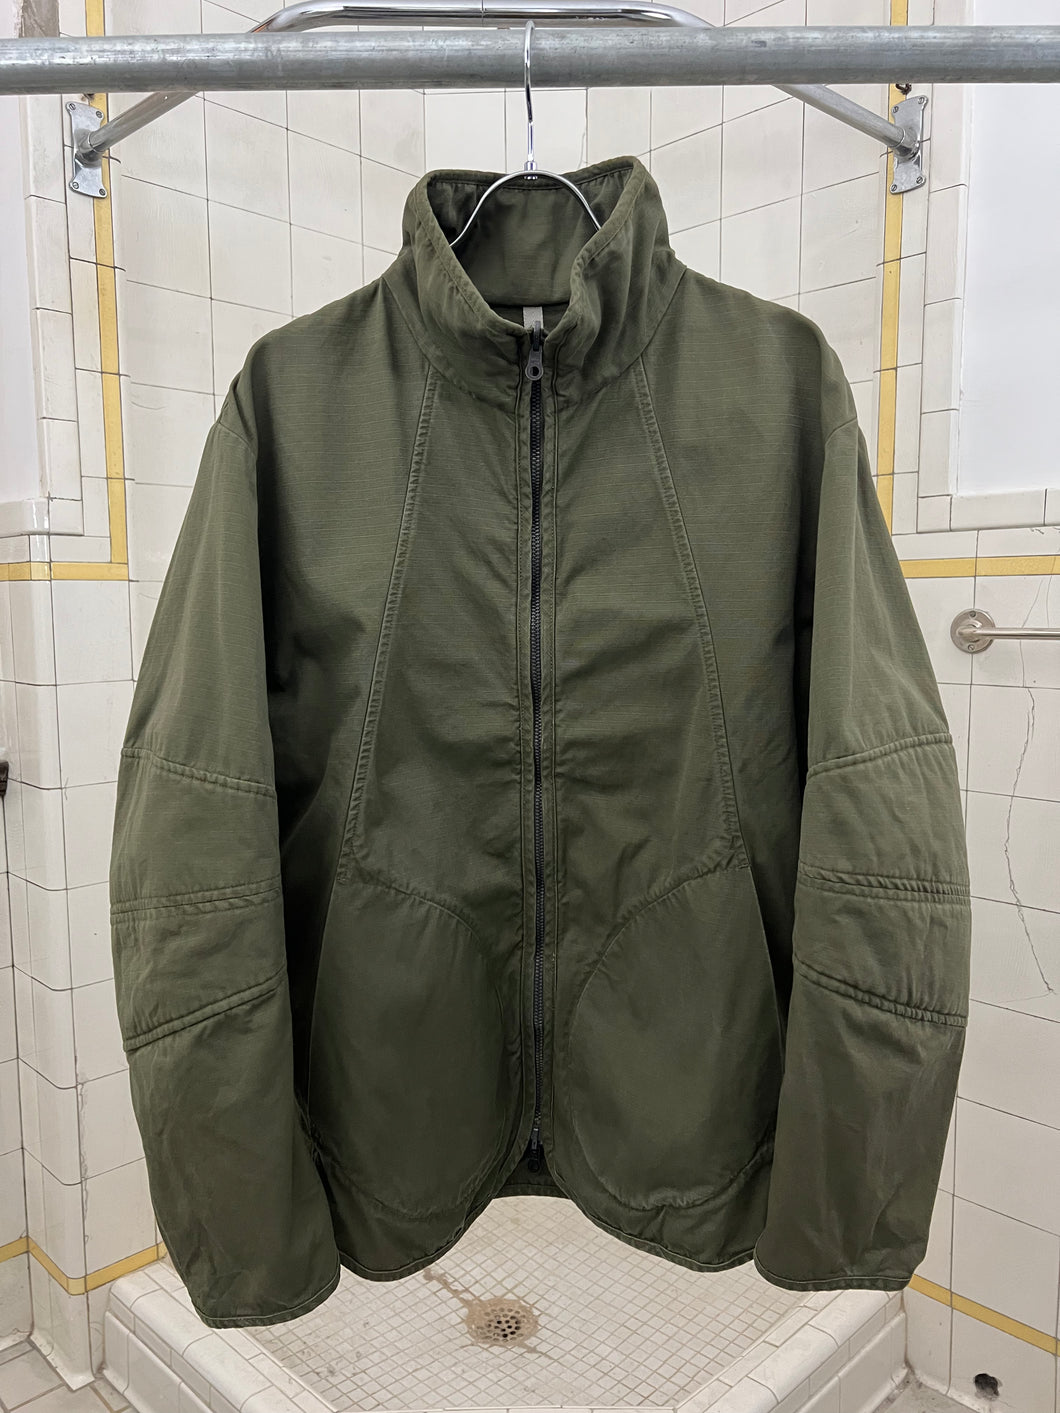 2000s Griffin Green Combat Jacket with Back Pouch Pocket - Size M